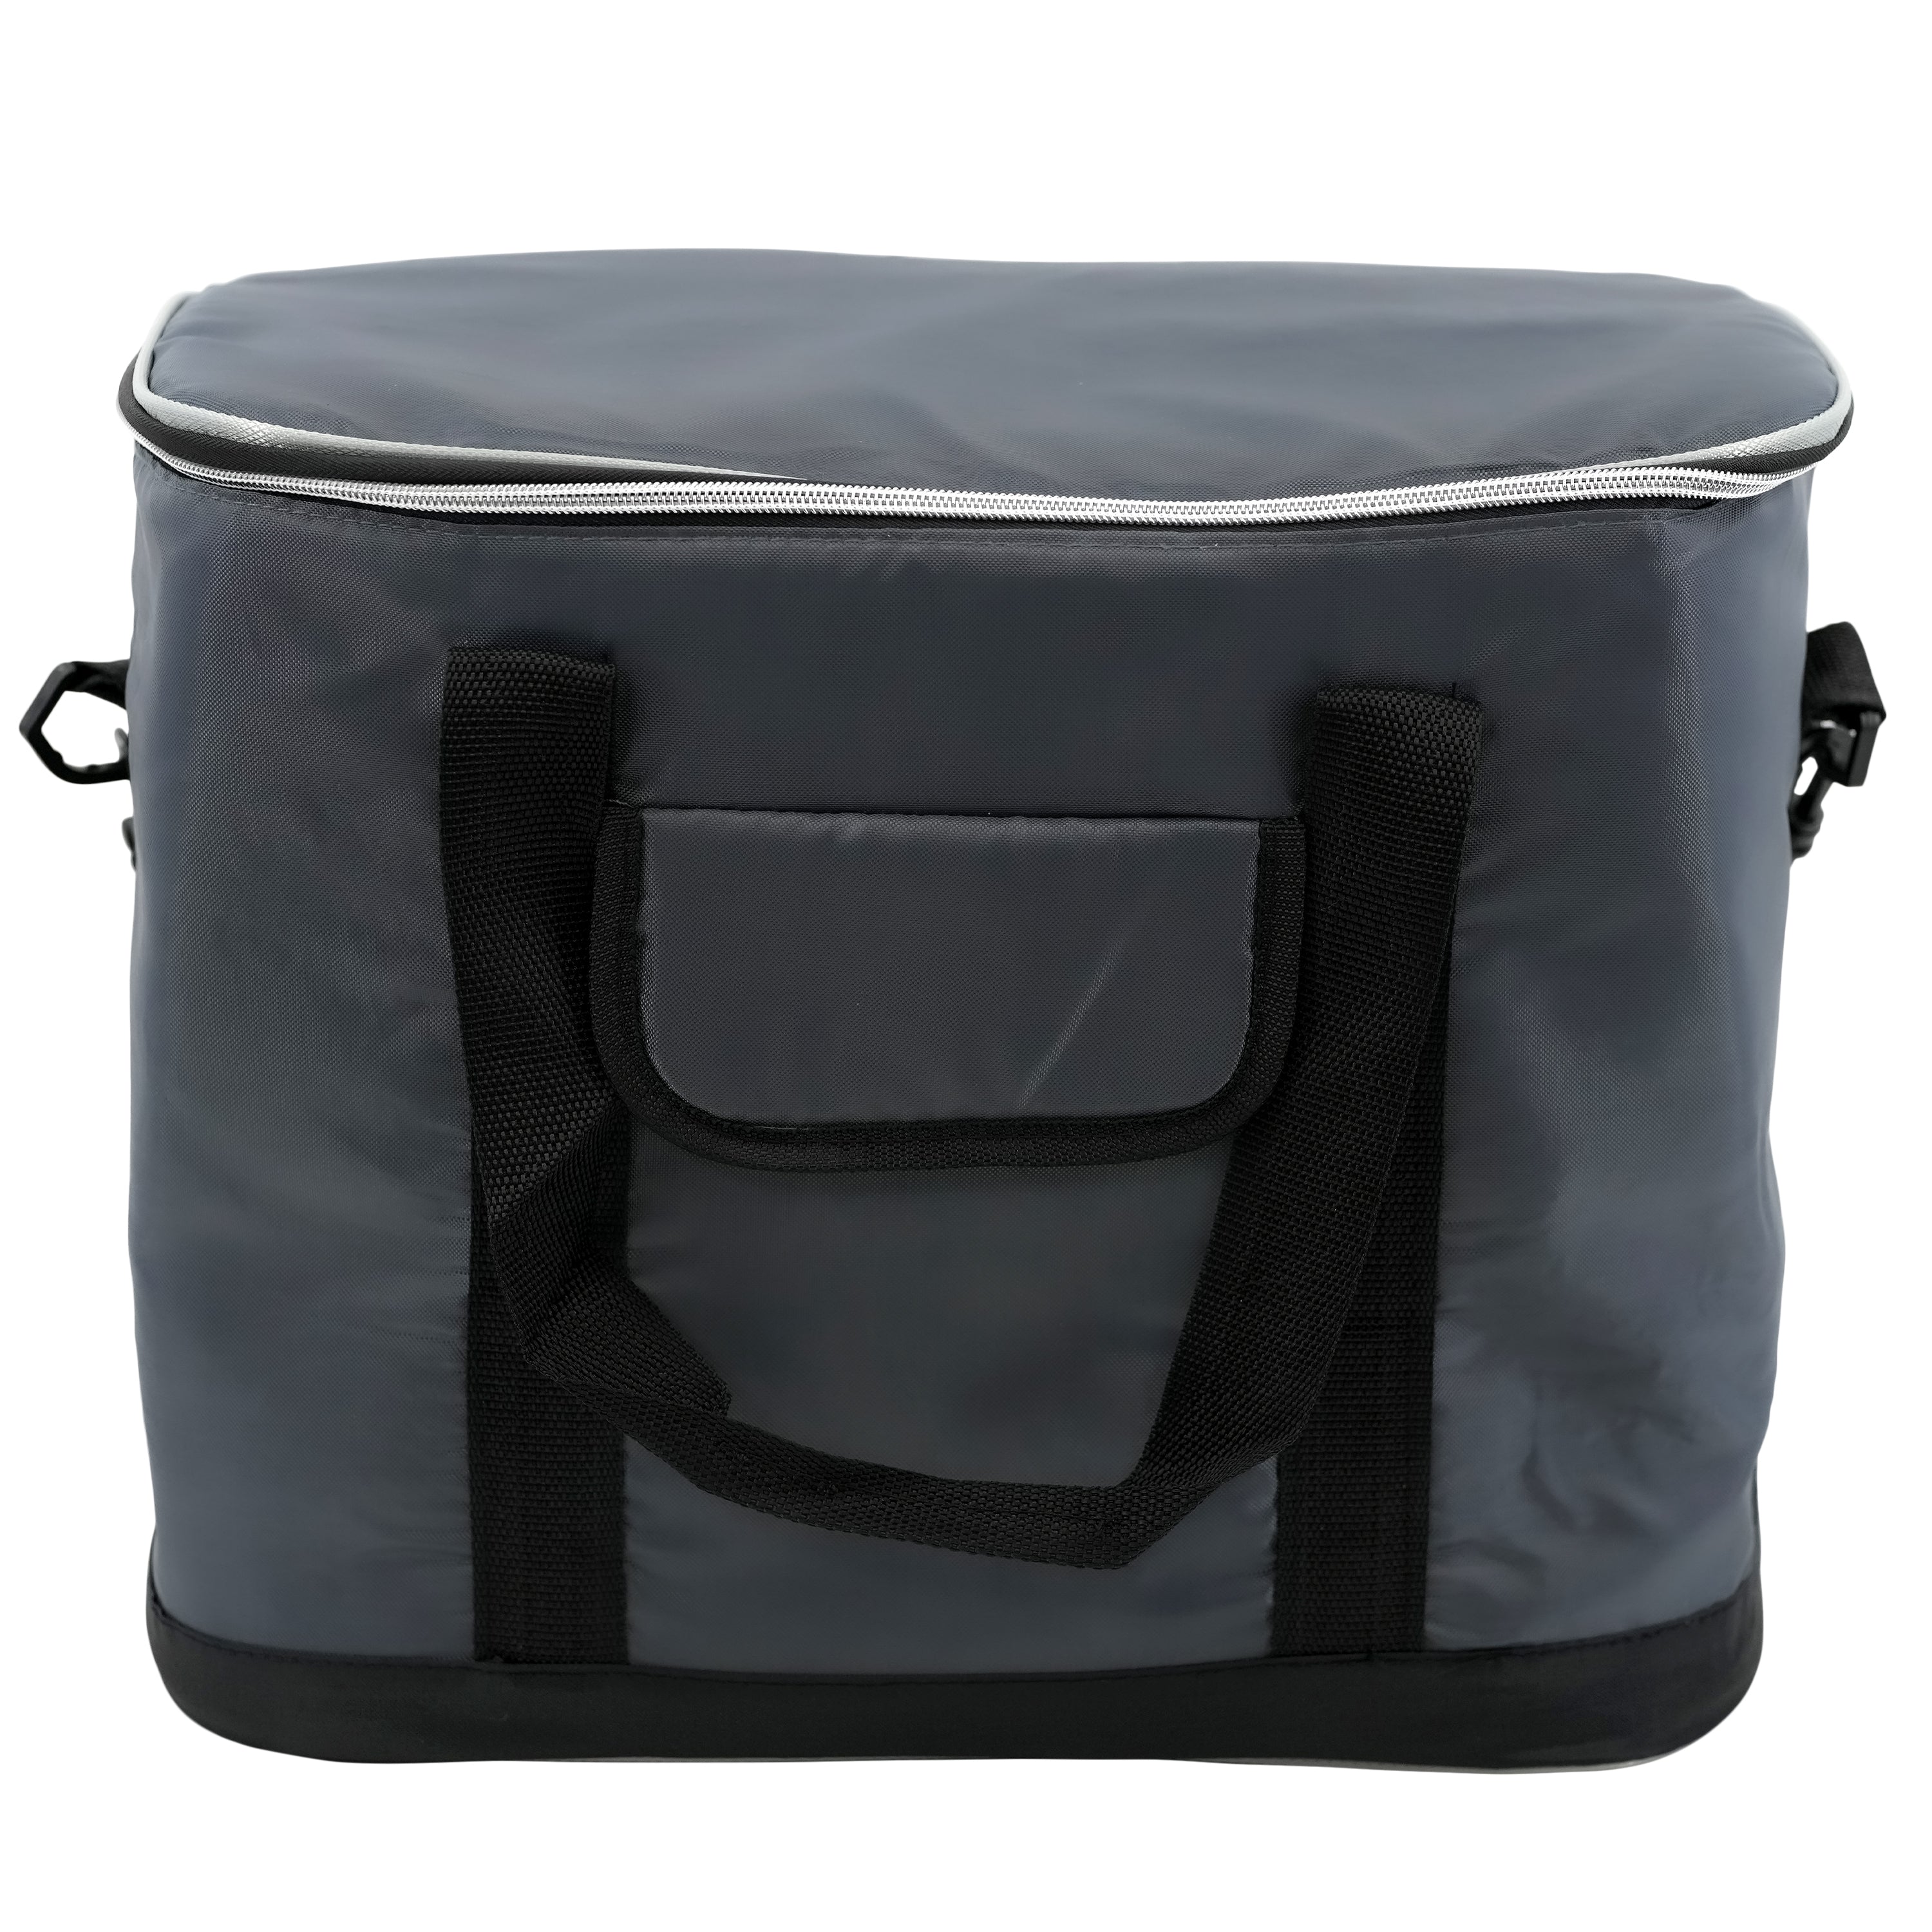 Extra Large 60 Can 30L Insulated Cool Bag Cooler Picnic Drinks Carrier Tote GEEZY - The Magic Toy Shop